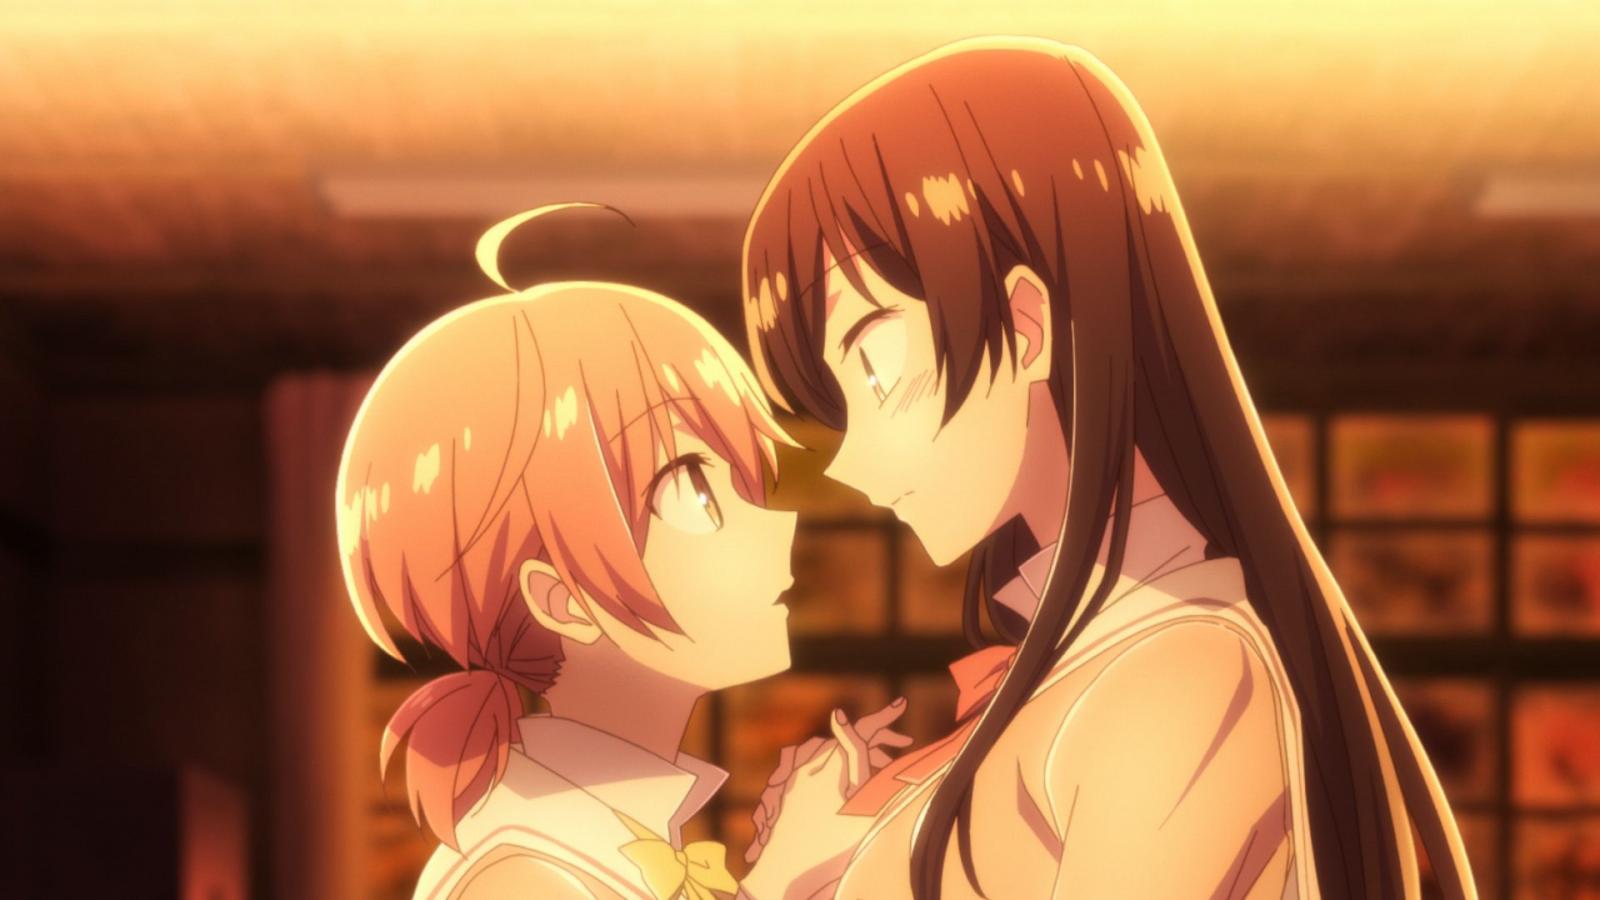 Bloom Into You - Gesamtedition - Volume 1-3: Episode 01-13 [Blu-ray] Image 9